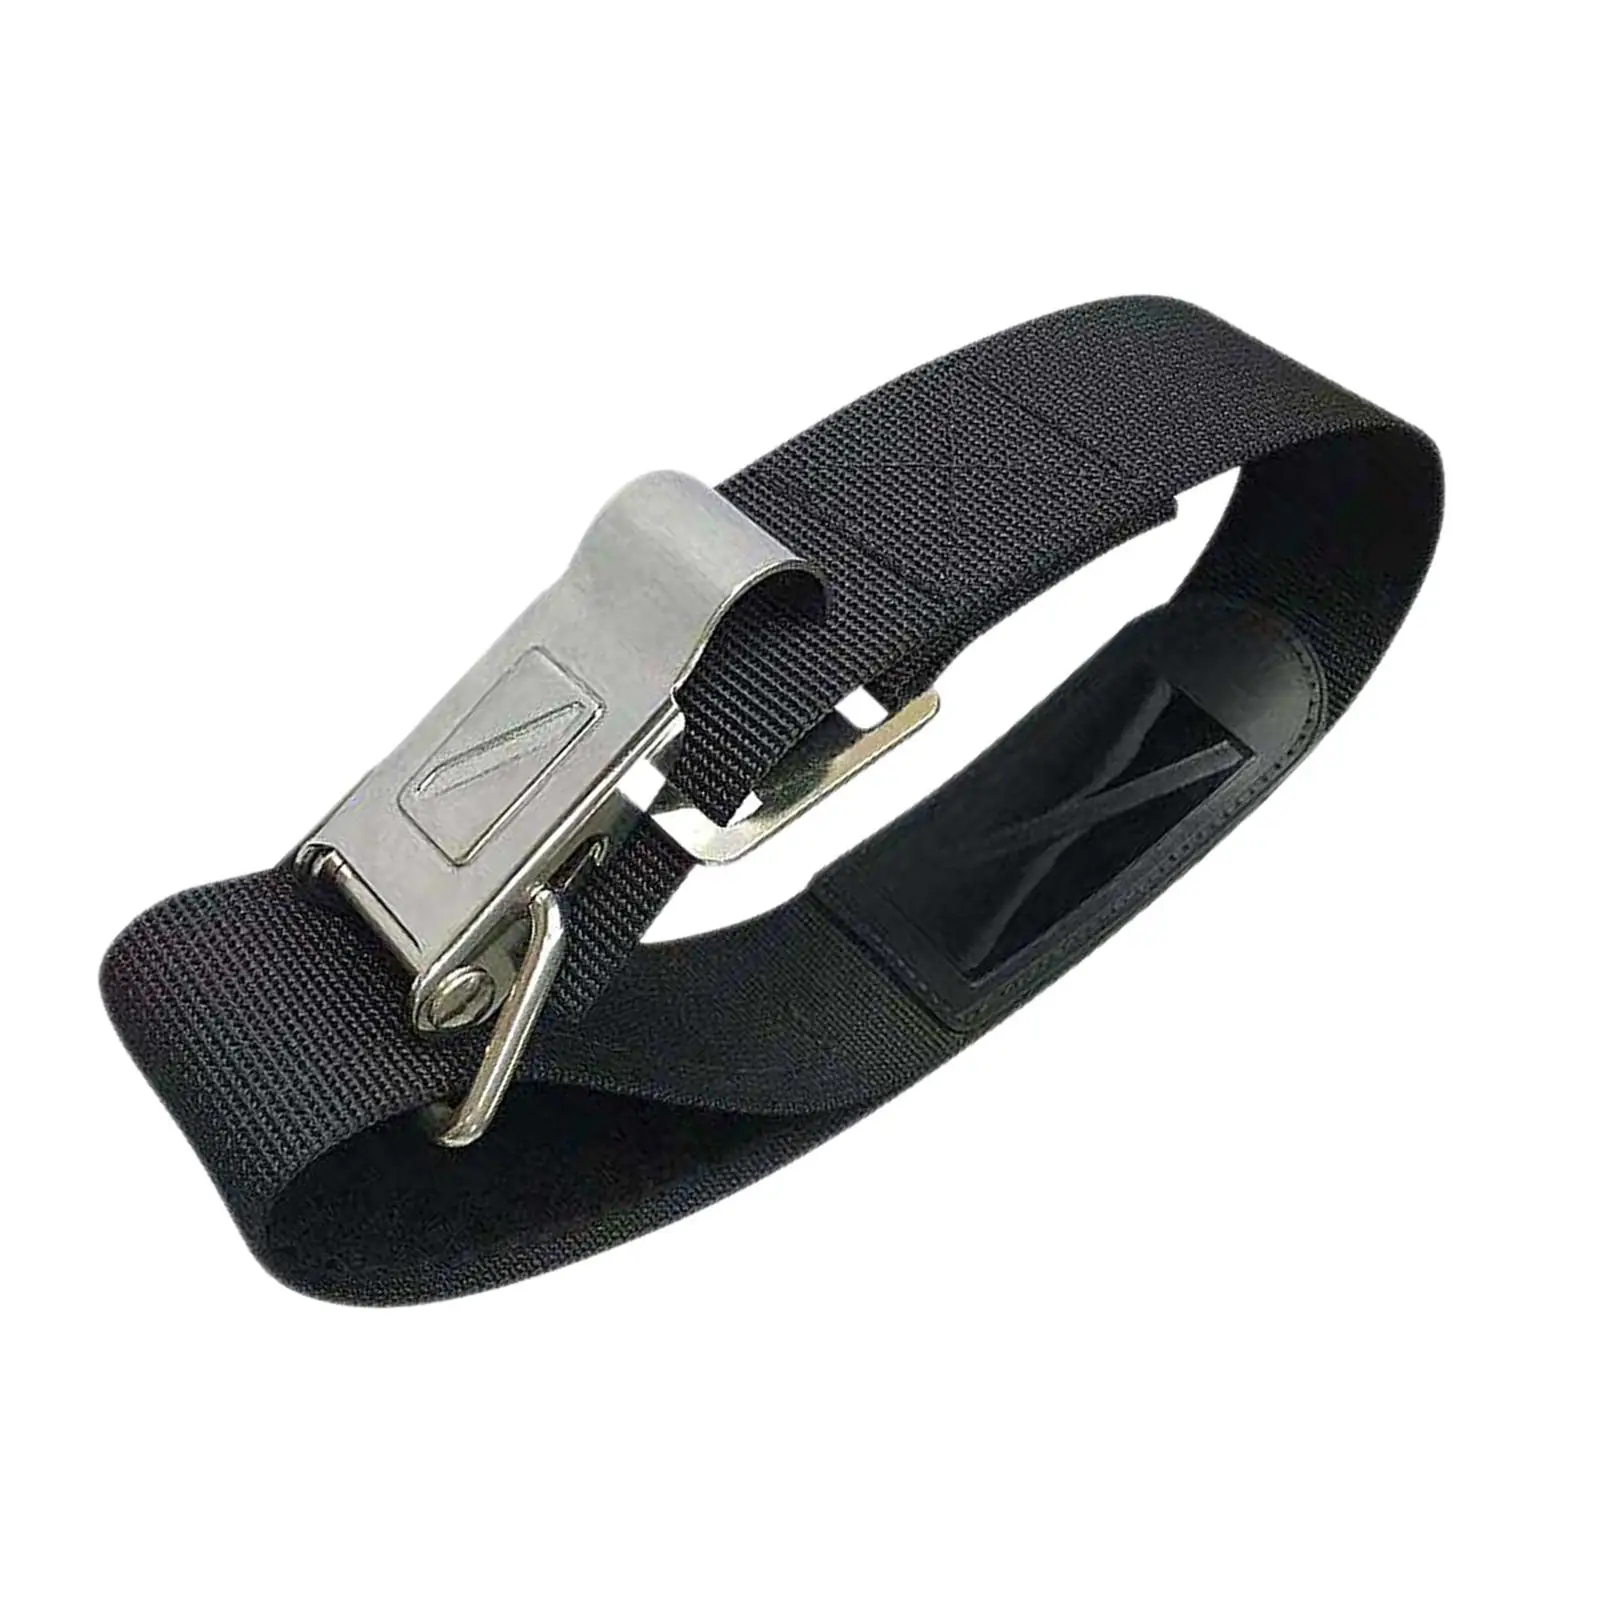 Premium Scuba Diving Tank Band cam Buckle Non Slip Quick Release 2inch Stainless